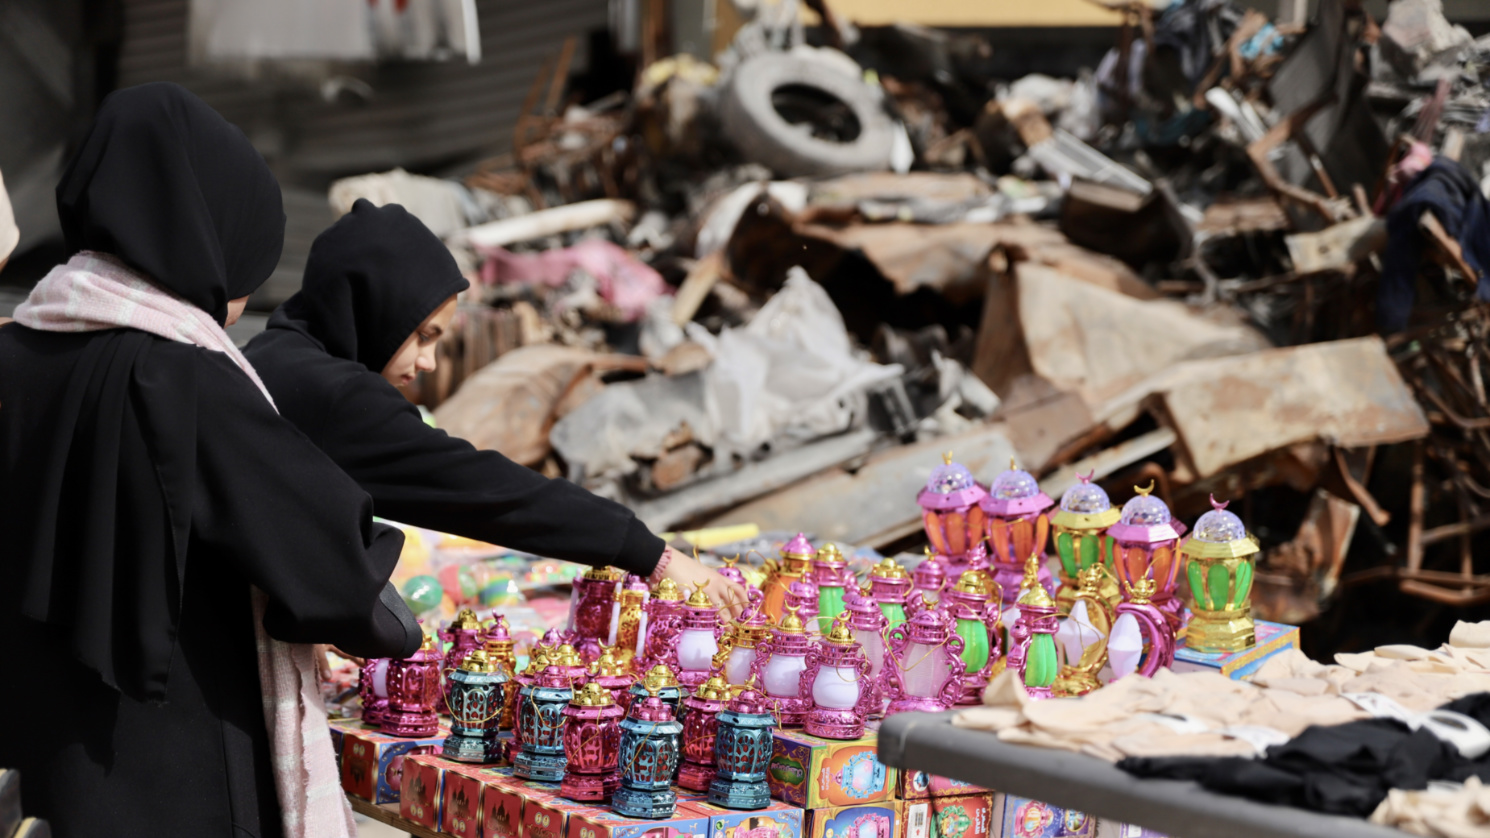 Palestinian girls pick lanterns from a stand in front of the destruction in Gaza City (Mohammed al-Hajjar/MEE)